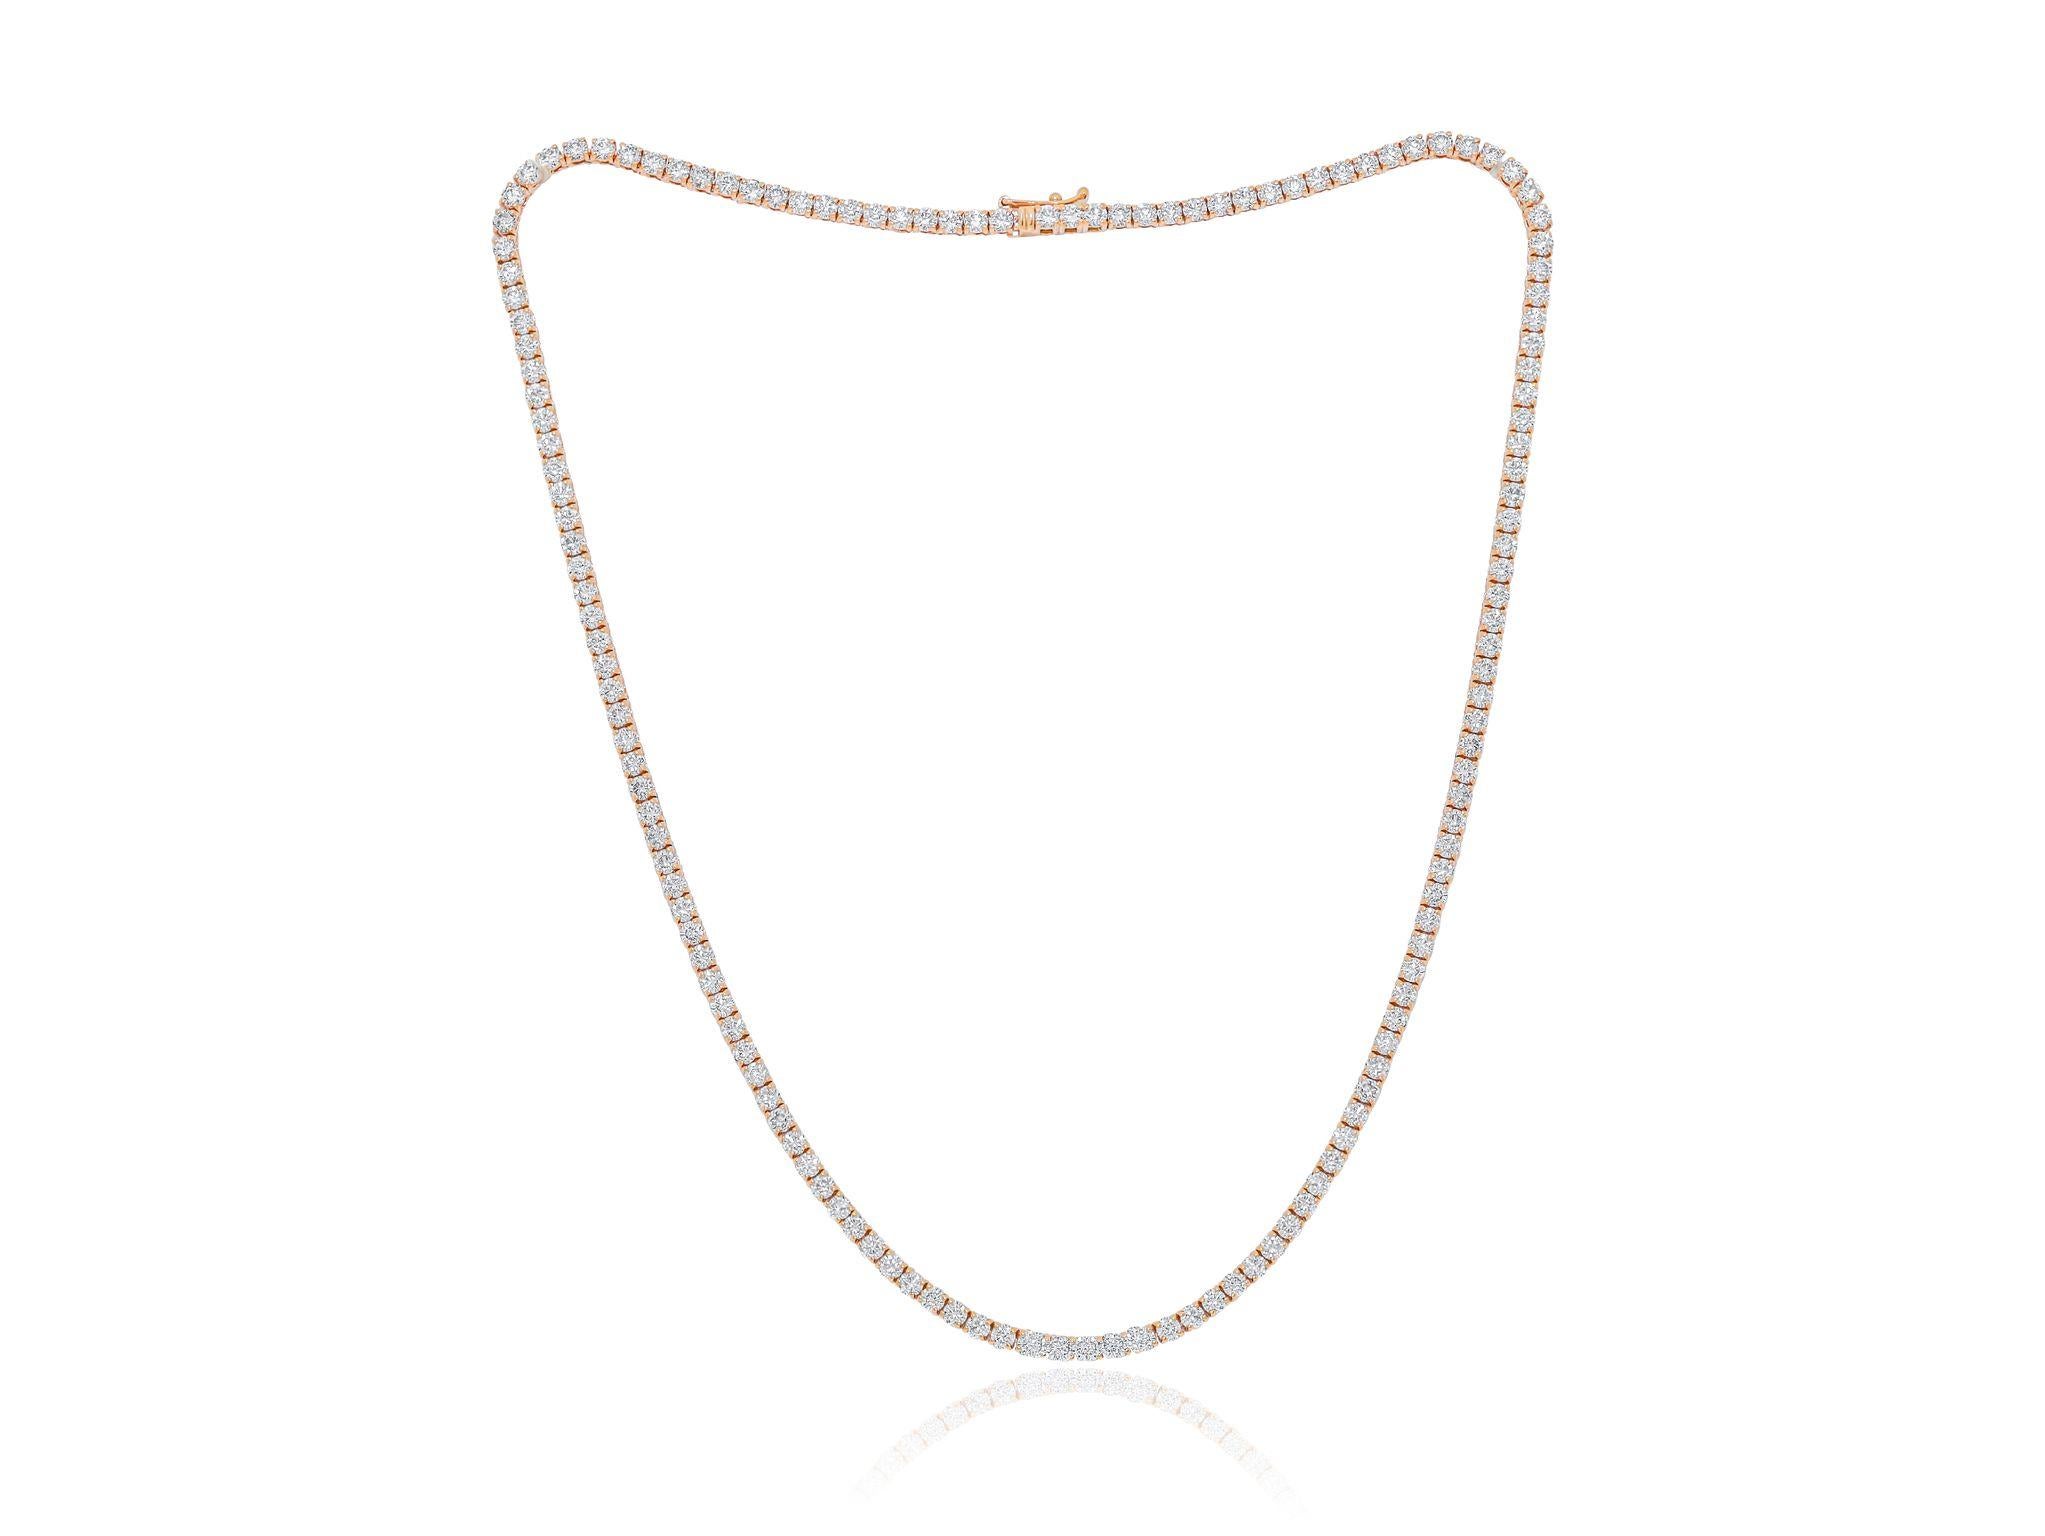 Custom 14kt rose gold graduated tennis necklace 10.20 cts of round diamonds FG color SI clarity. Excellent cut.